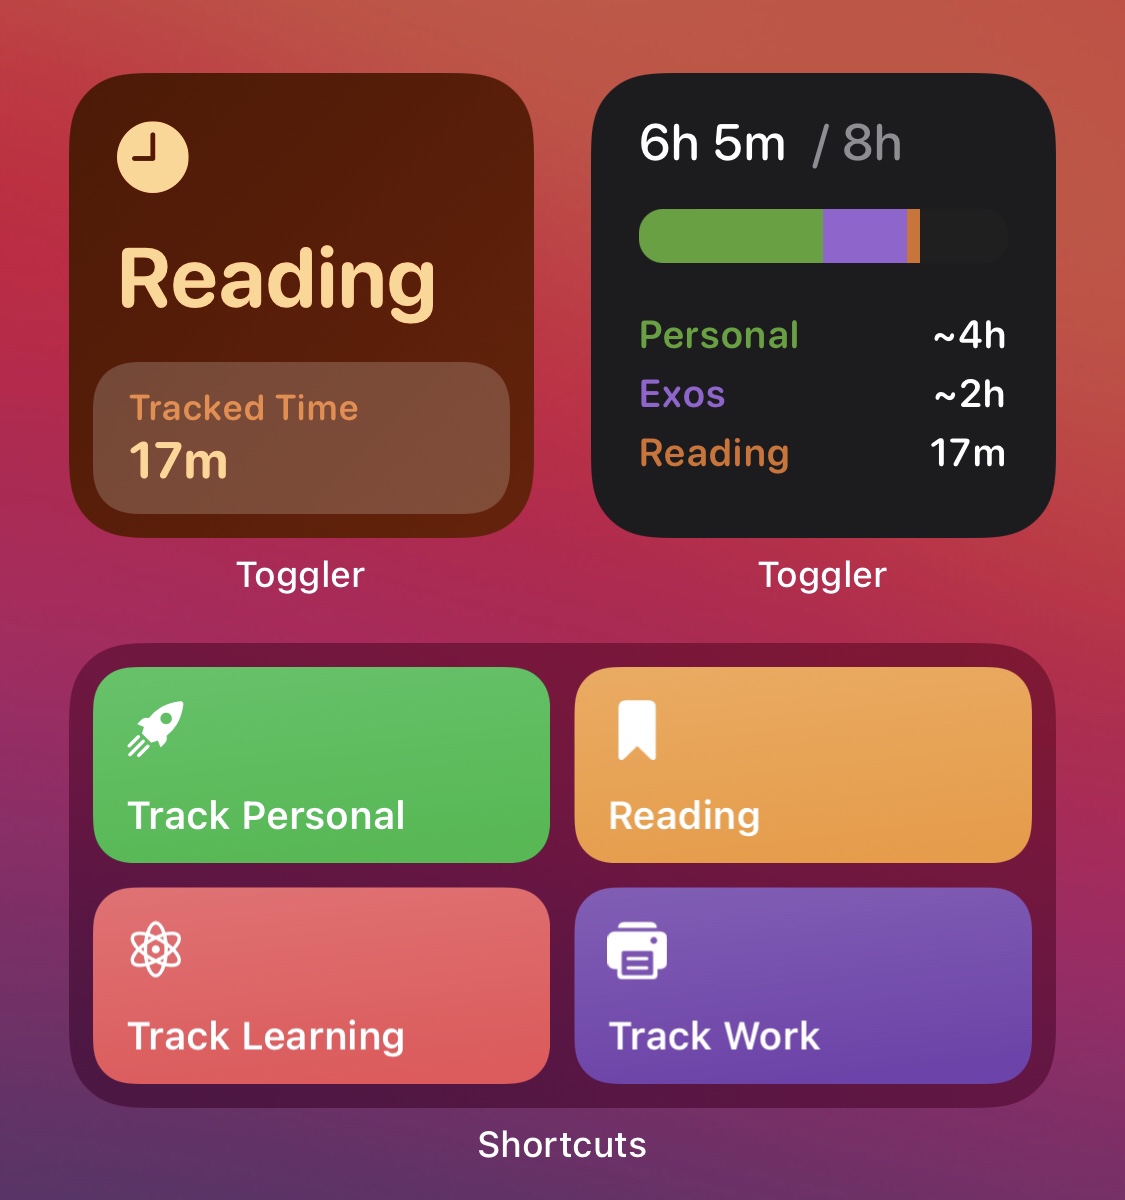 My current iOS 14 Time tracking setup